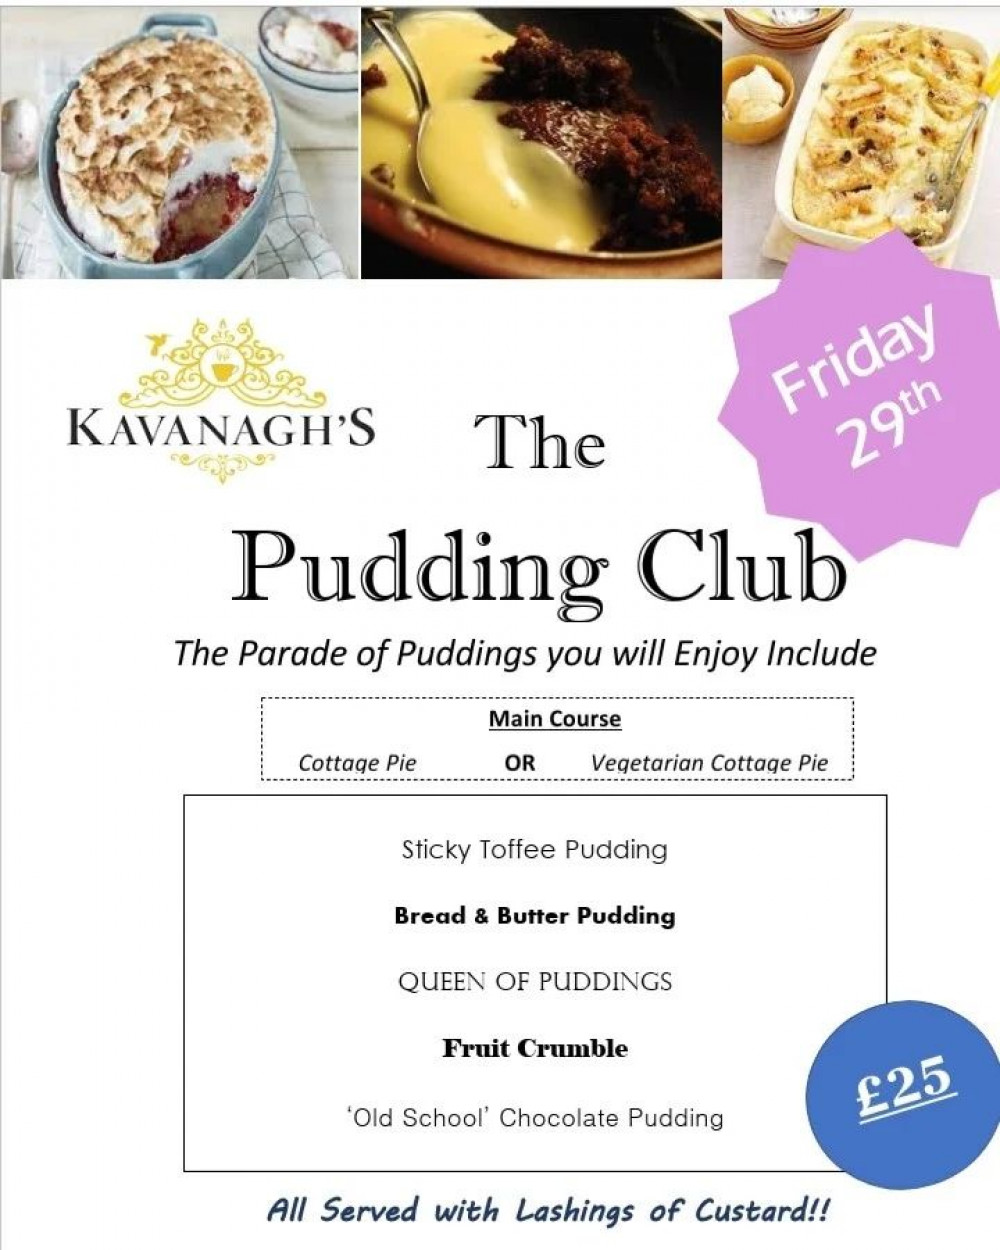 Kavanagh's Pudding Club poster